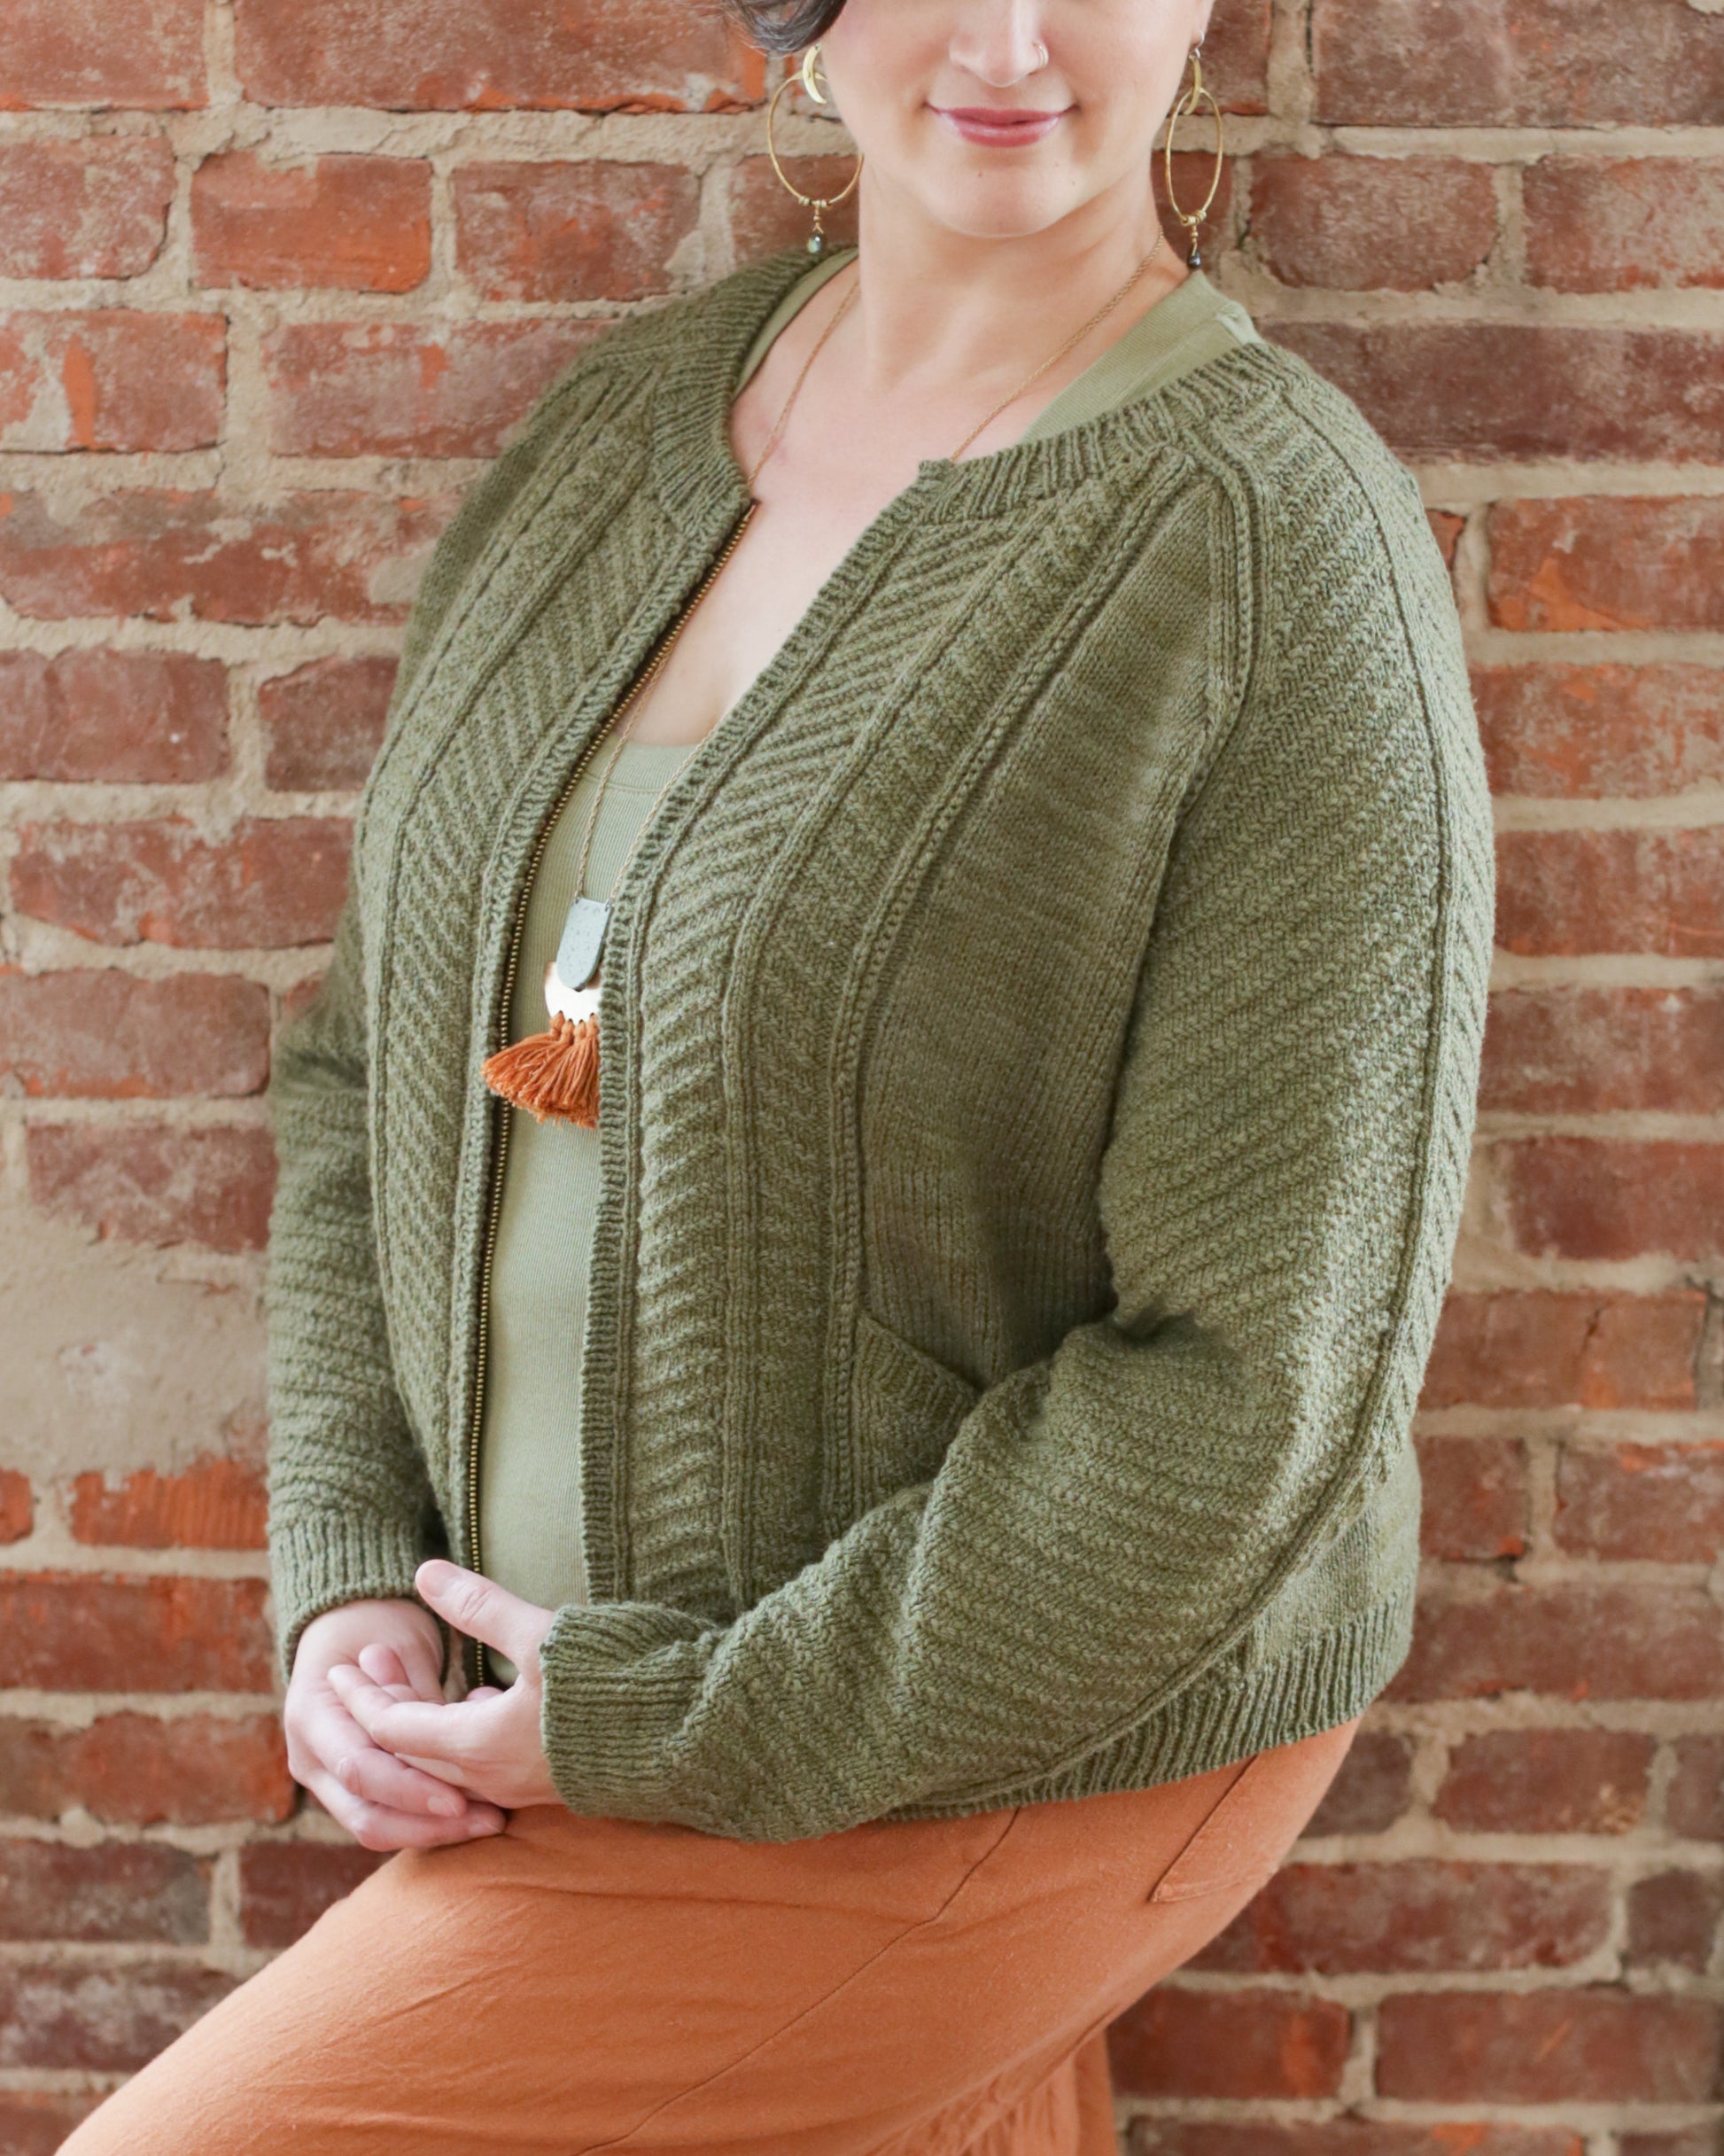 Seen from the neck down, Jen wears a green cardigan, knit with a large chevron pattern and a thin ribbed edging. The cardigan has two slanted front pockets and a zipper.